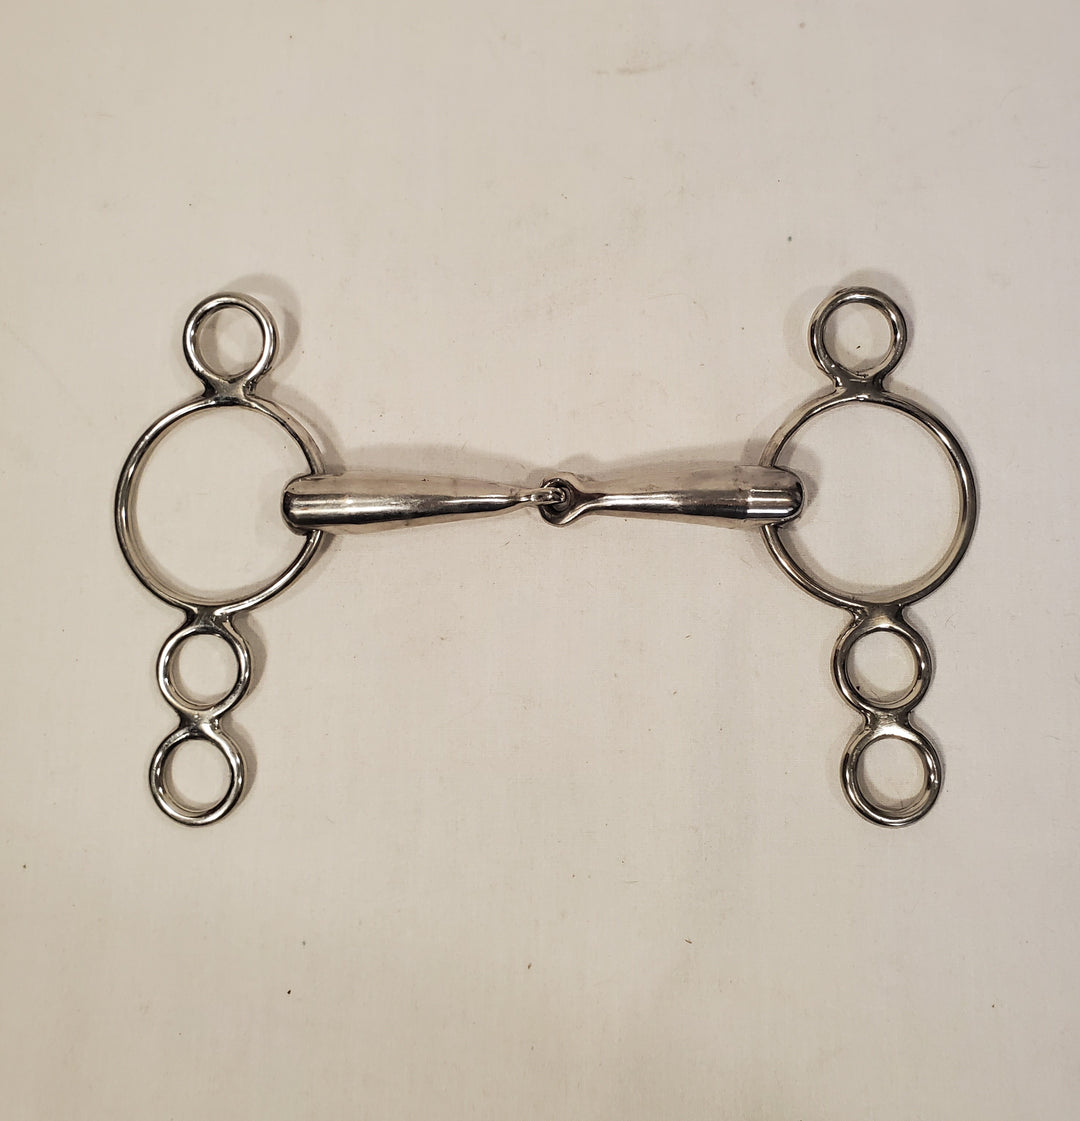 4-Ring Weighted 20 mm Elevator Snaffle - 5.75" - New!